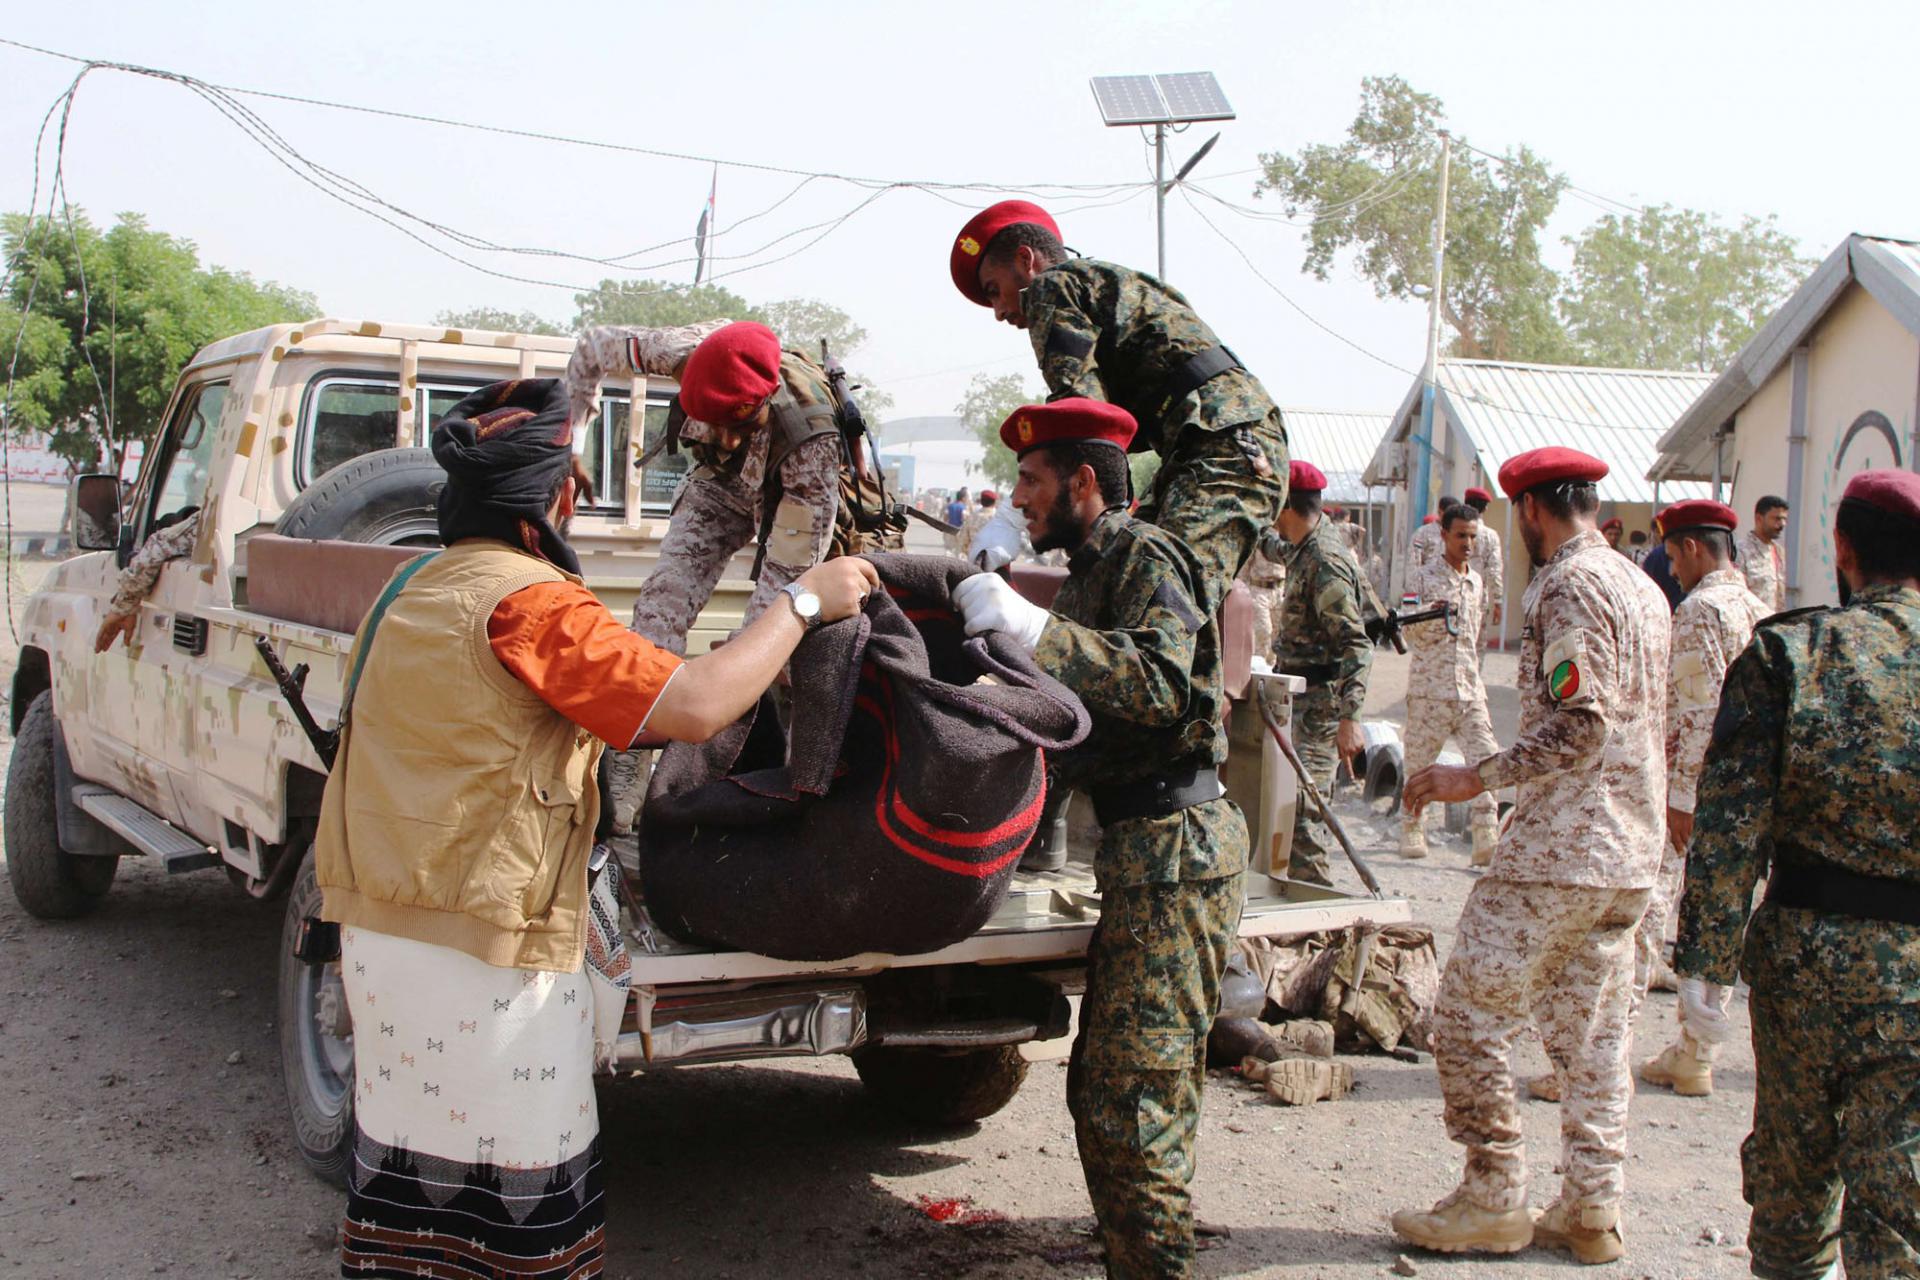 The STC took over the government's military bases in Aden